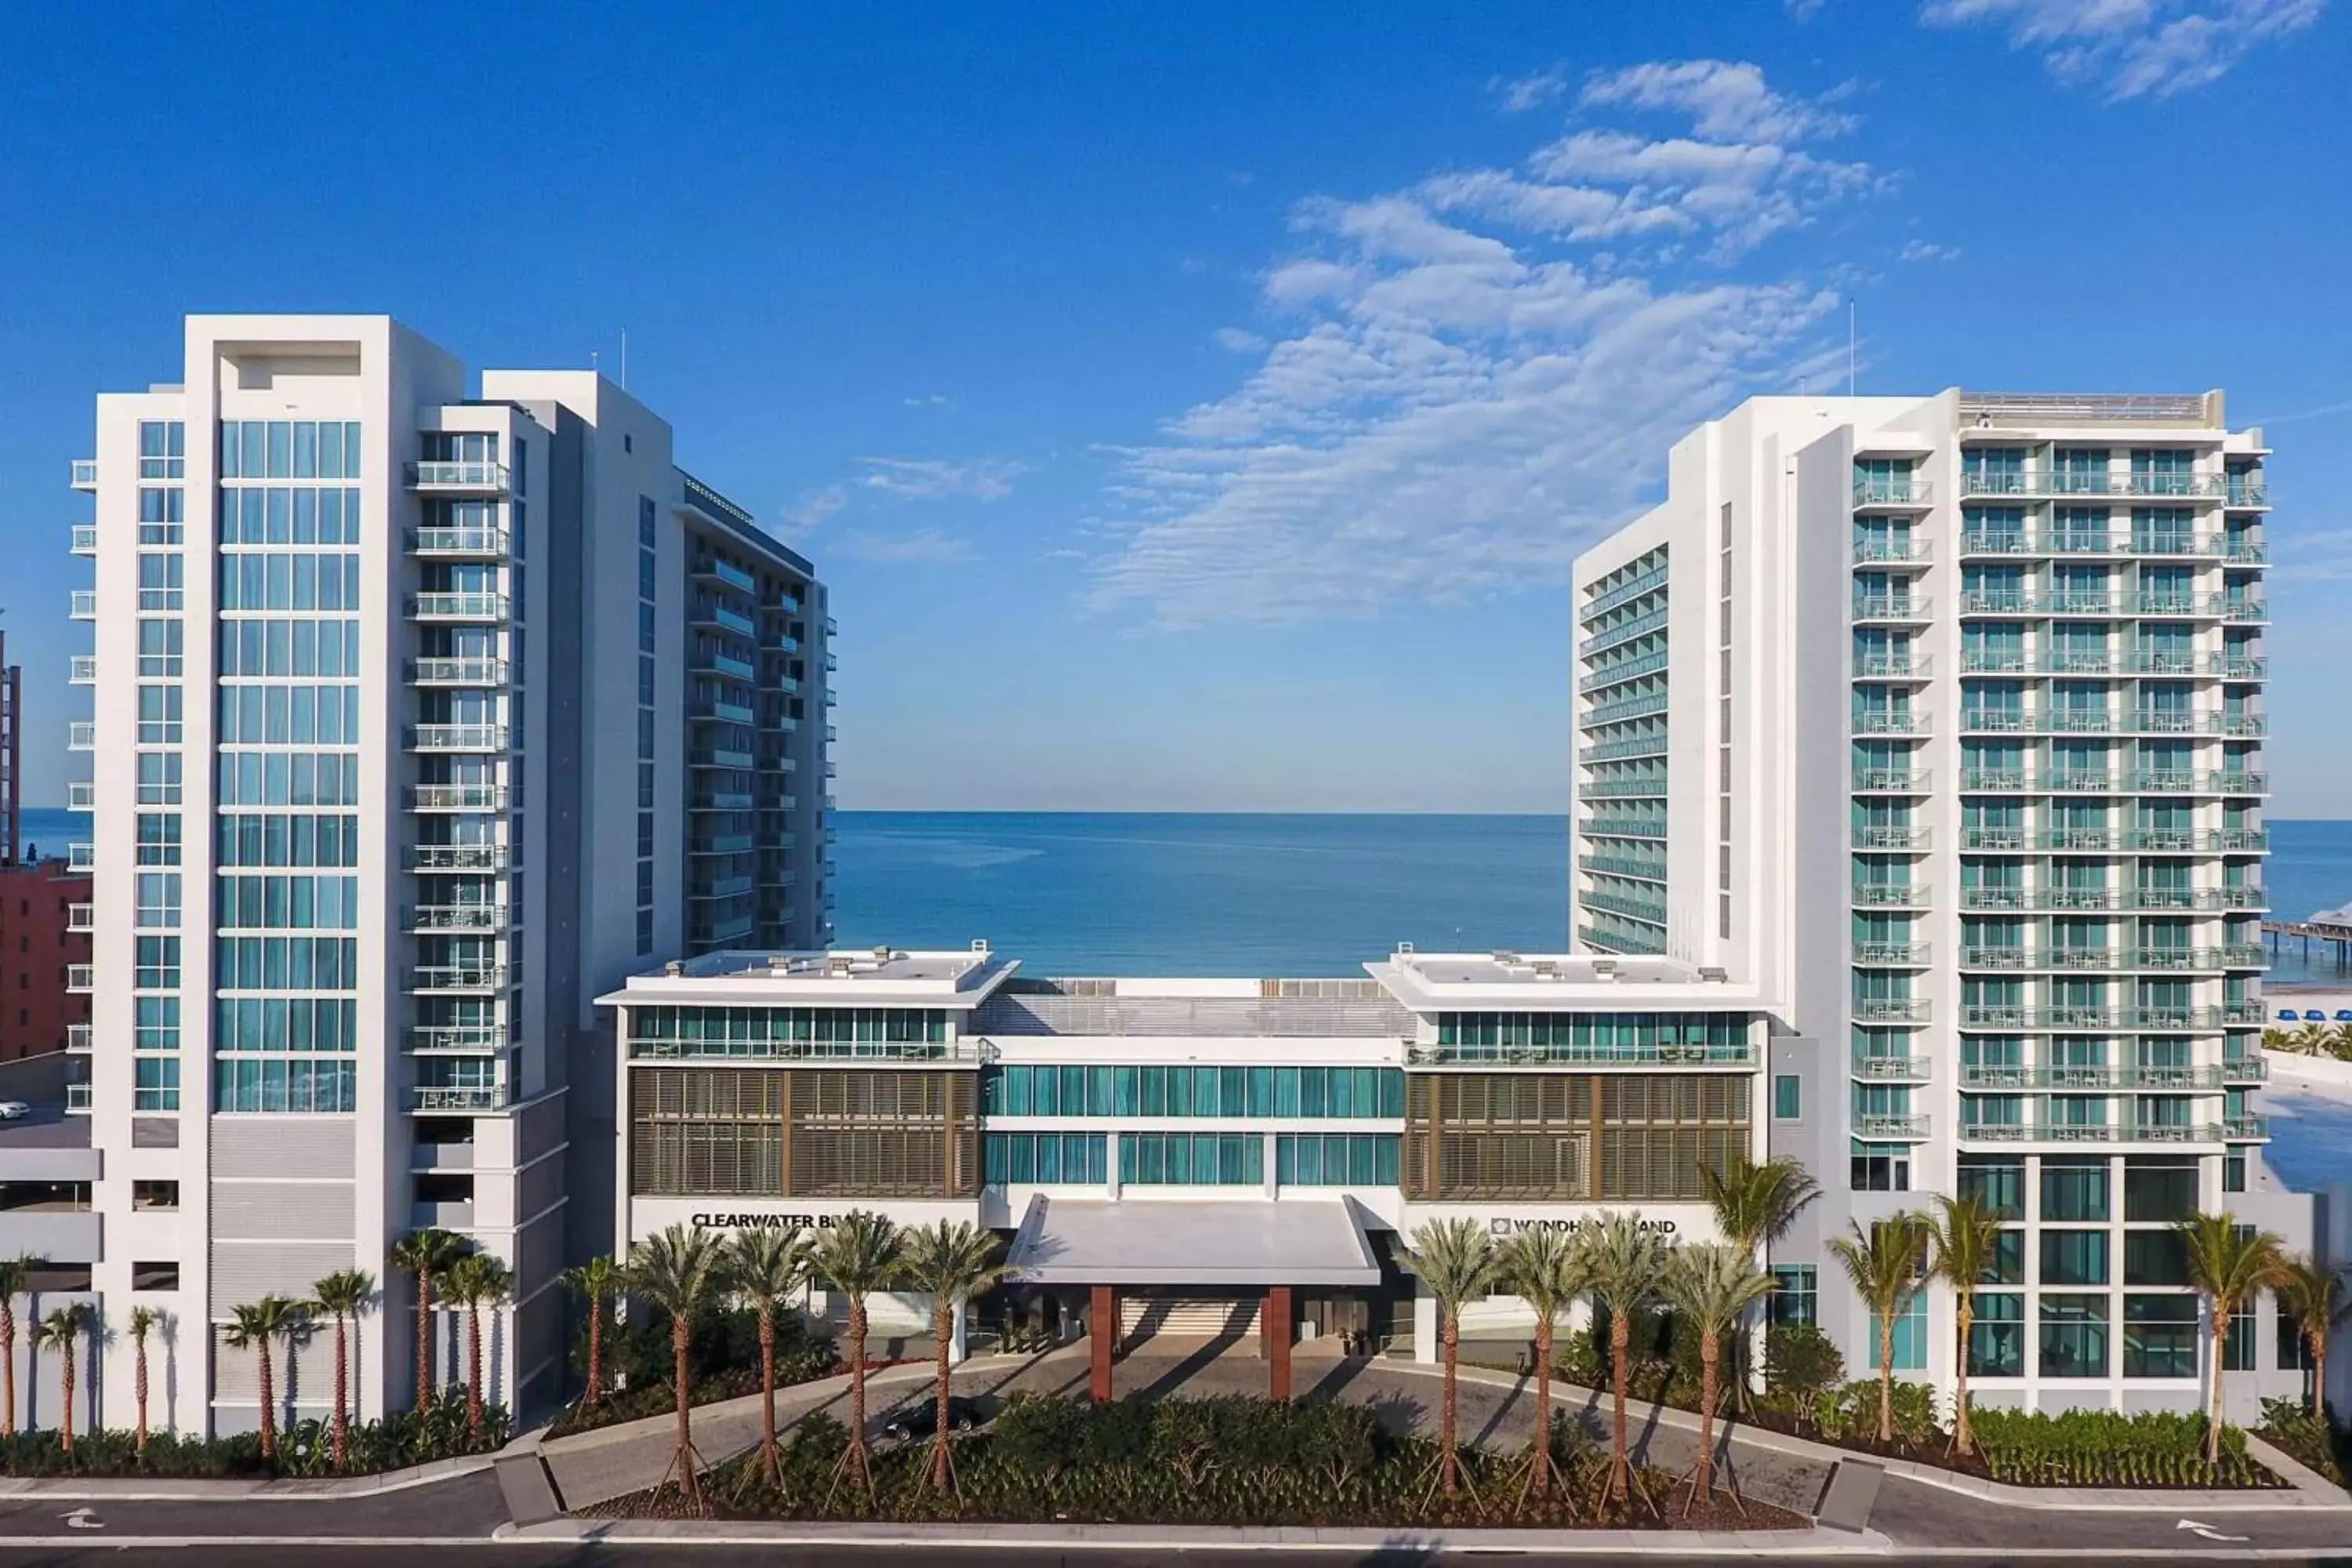 Property building in Wyndham Grand Clearwater Beach